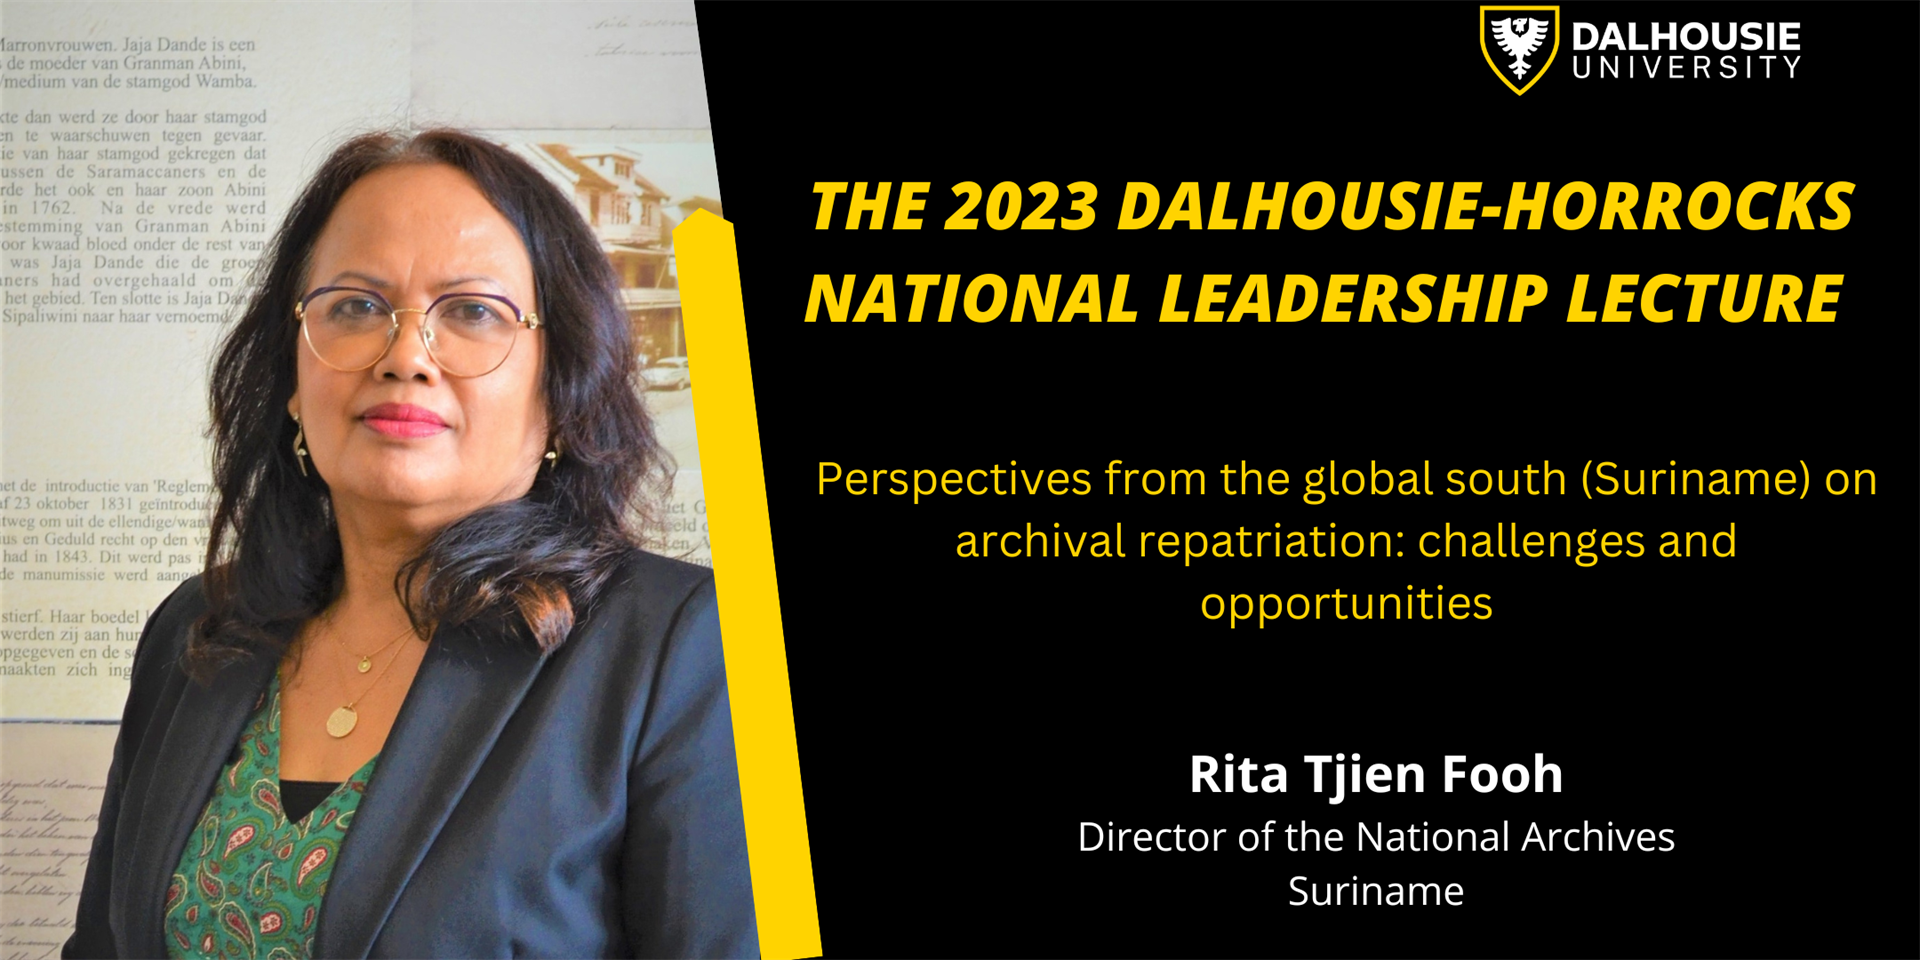 Image of Ria Tijien Fooh, Poster for the 2023 Dalhousie